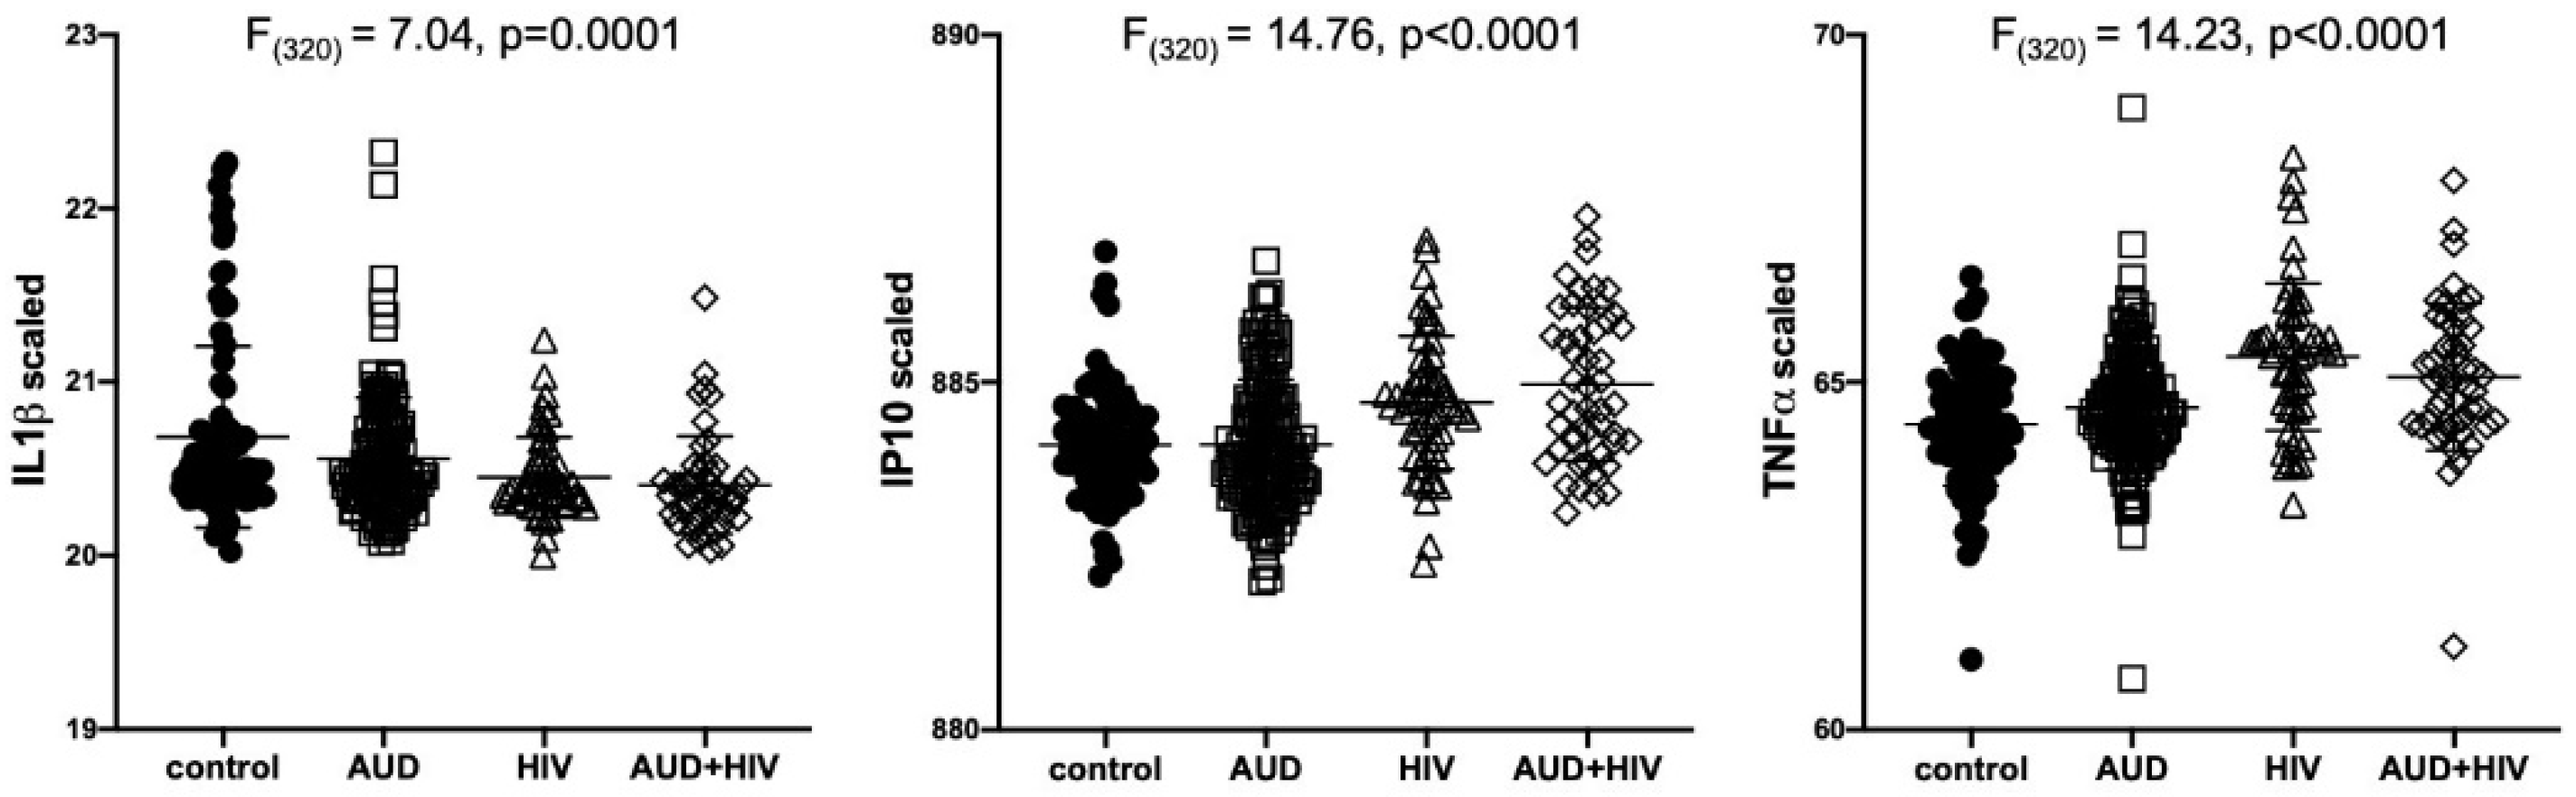 IJMS | Free Full-Text | Preliminary Evidence for a Relationship between  Elevated Plasma TNFα and Smaller Subcortical White Matter Volume in HCV  Infection Irrespective of HIV or AUD Comorbidity